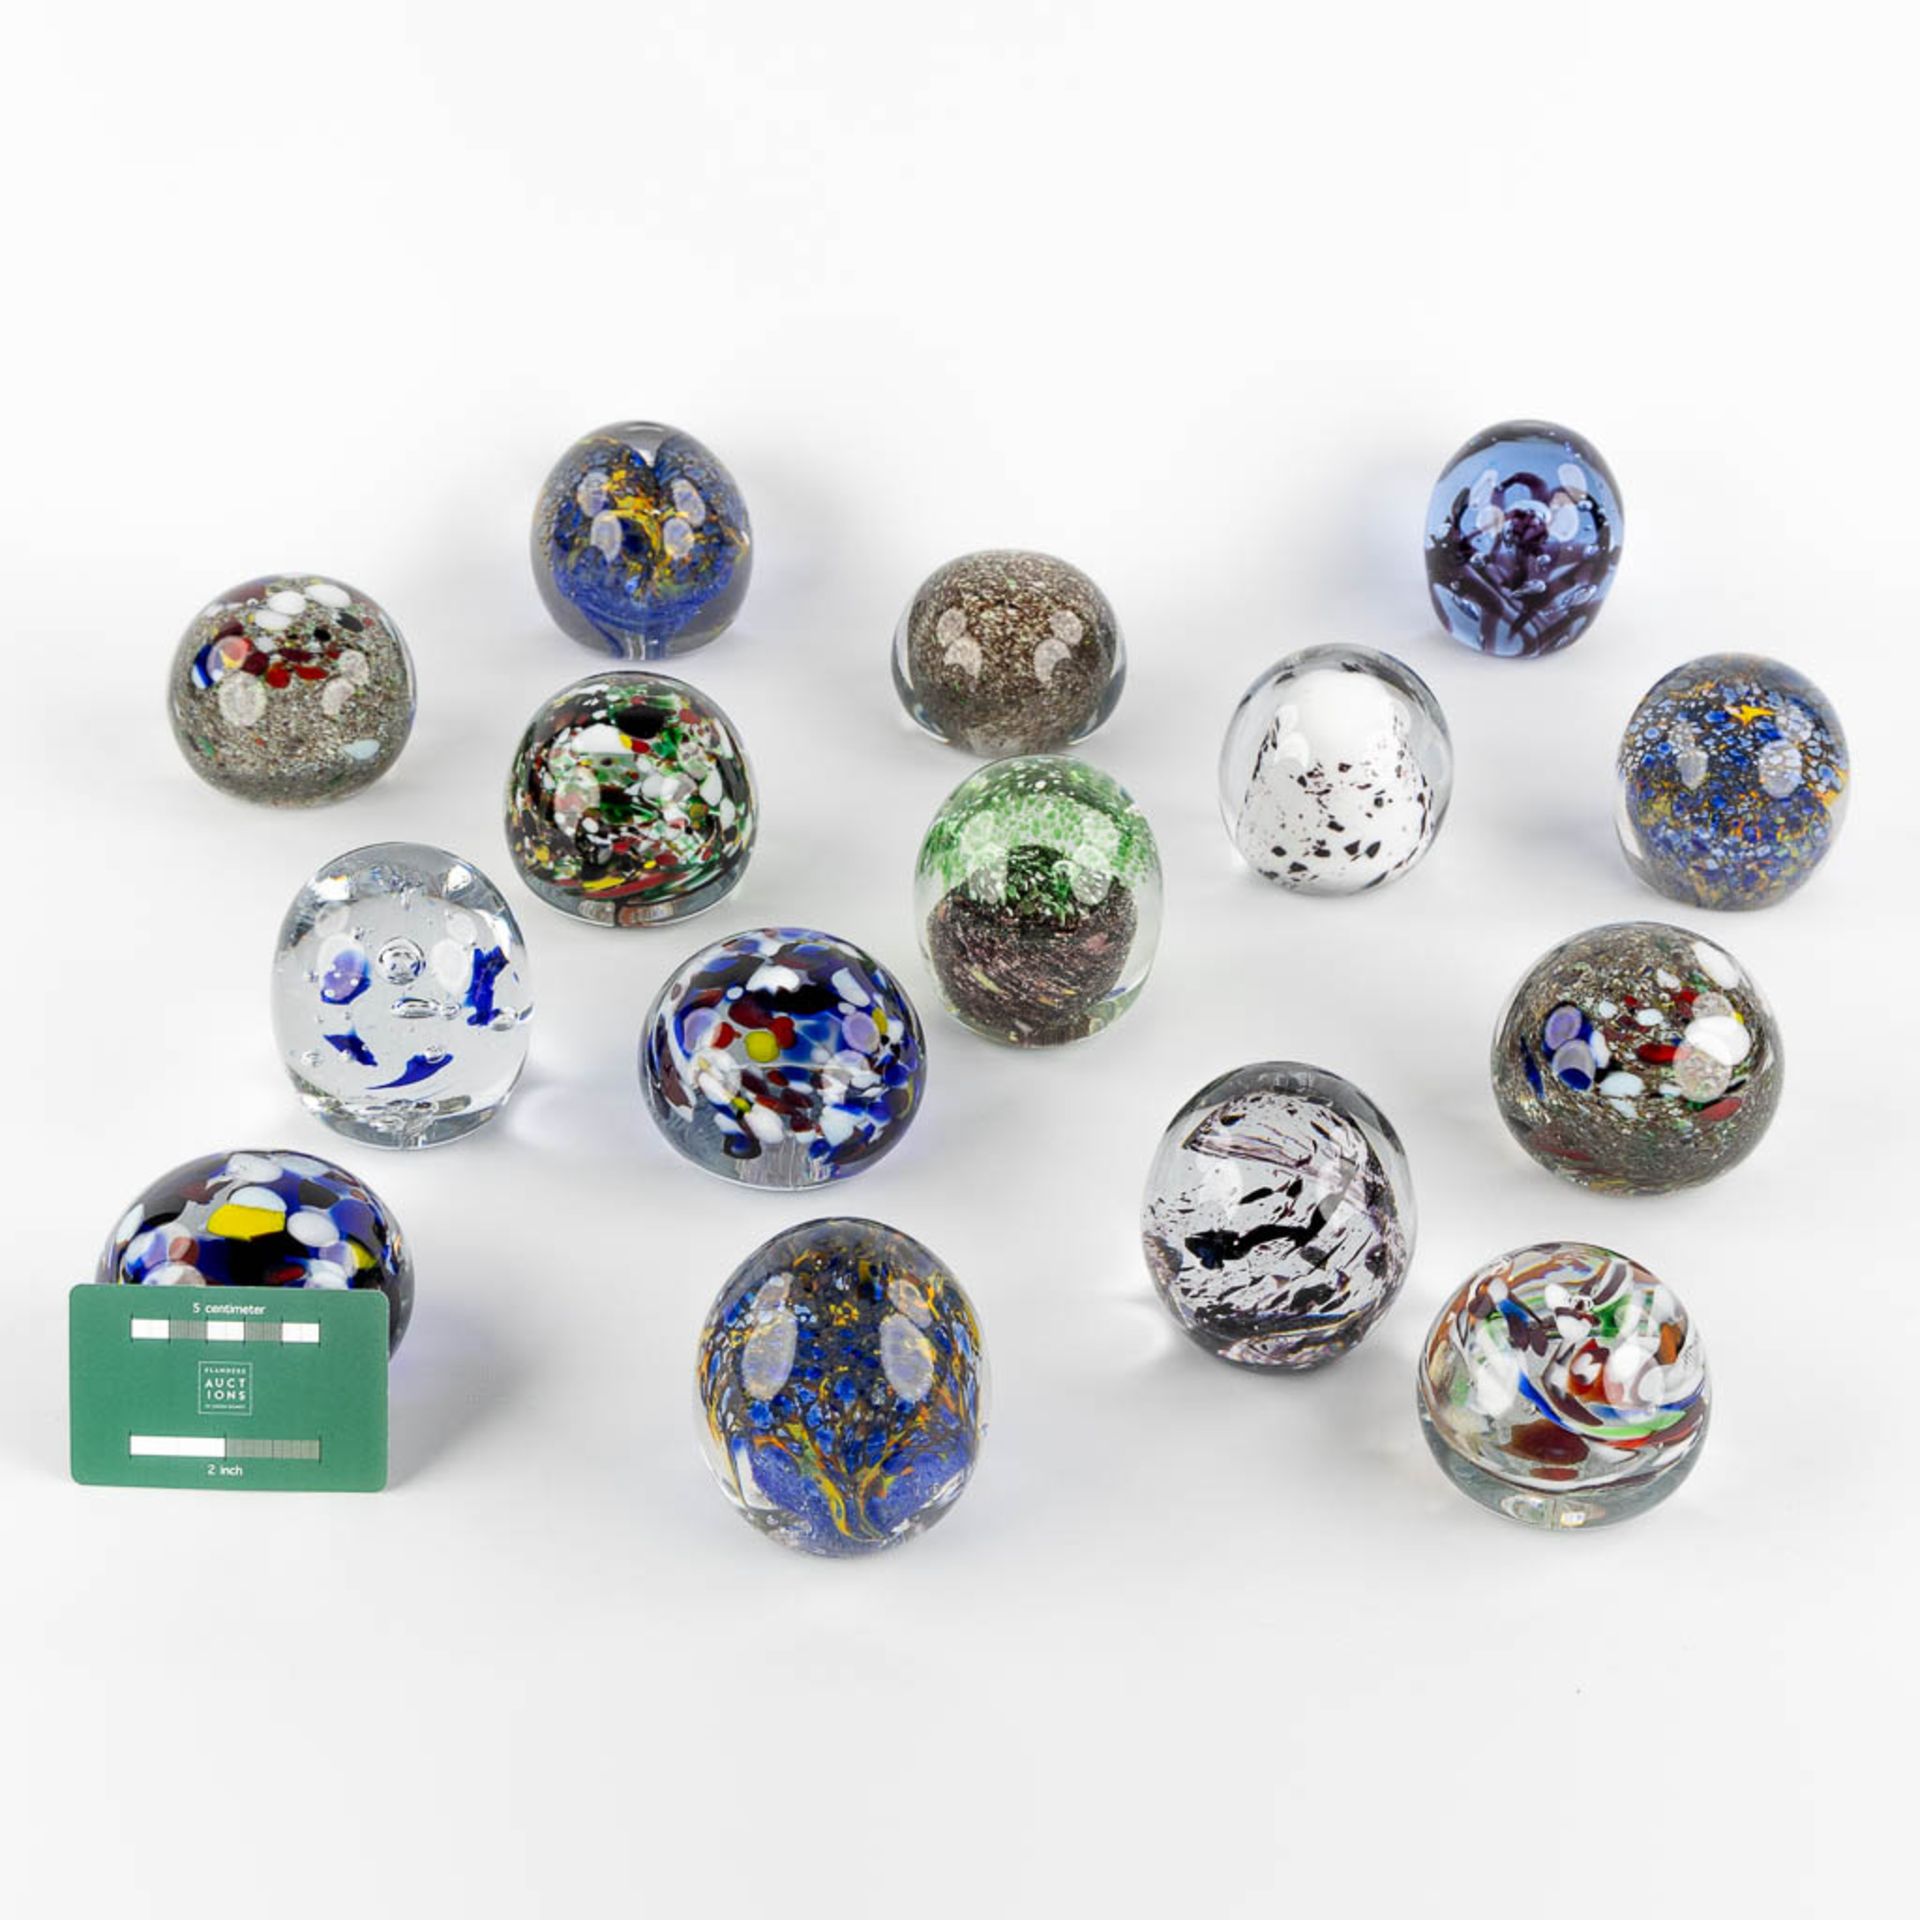 15 paperweights or Presse Papiers, probably made in Murano Italy. (H:8 x D:8 cm) - Bild 2 aus 15